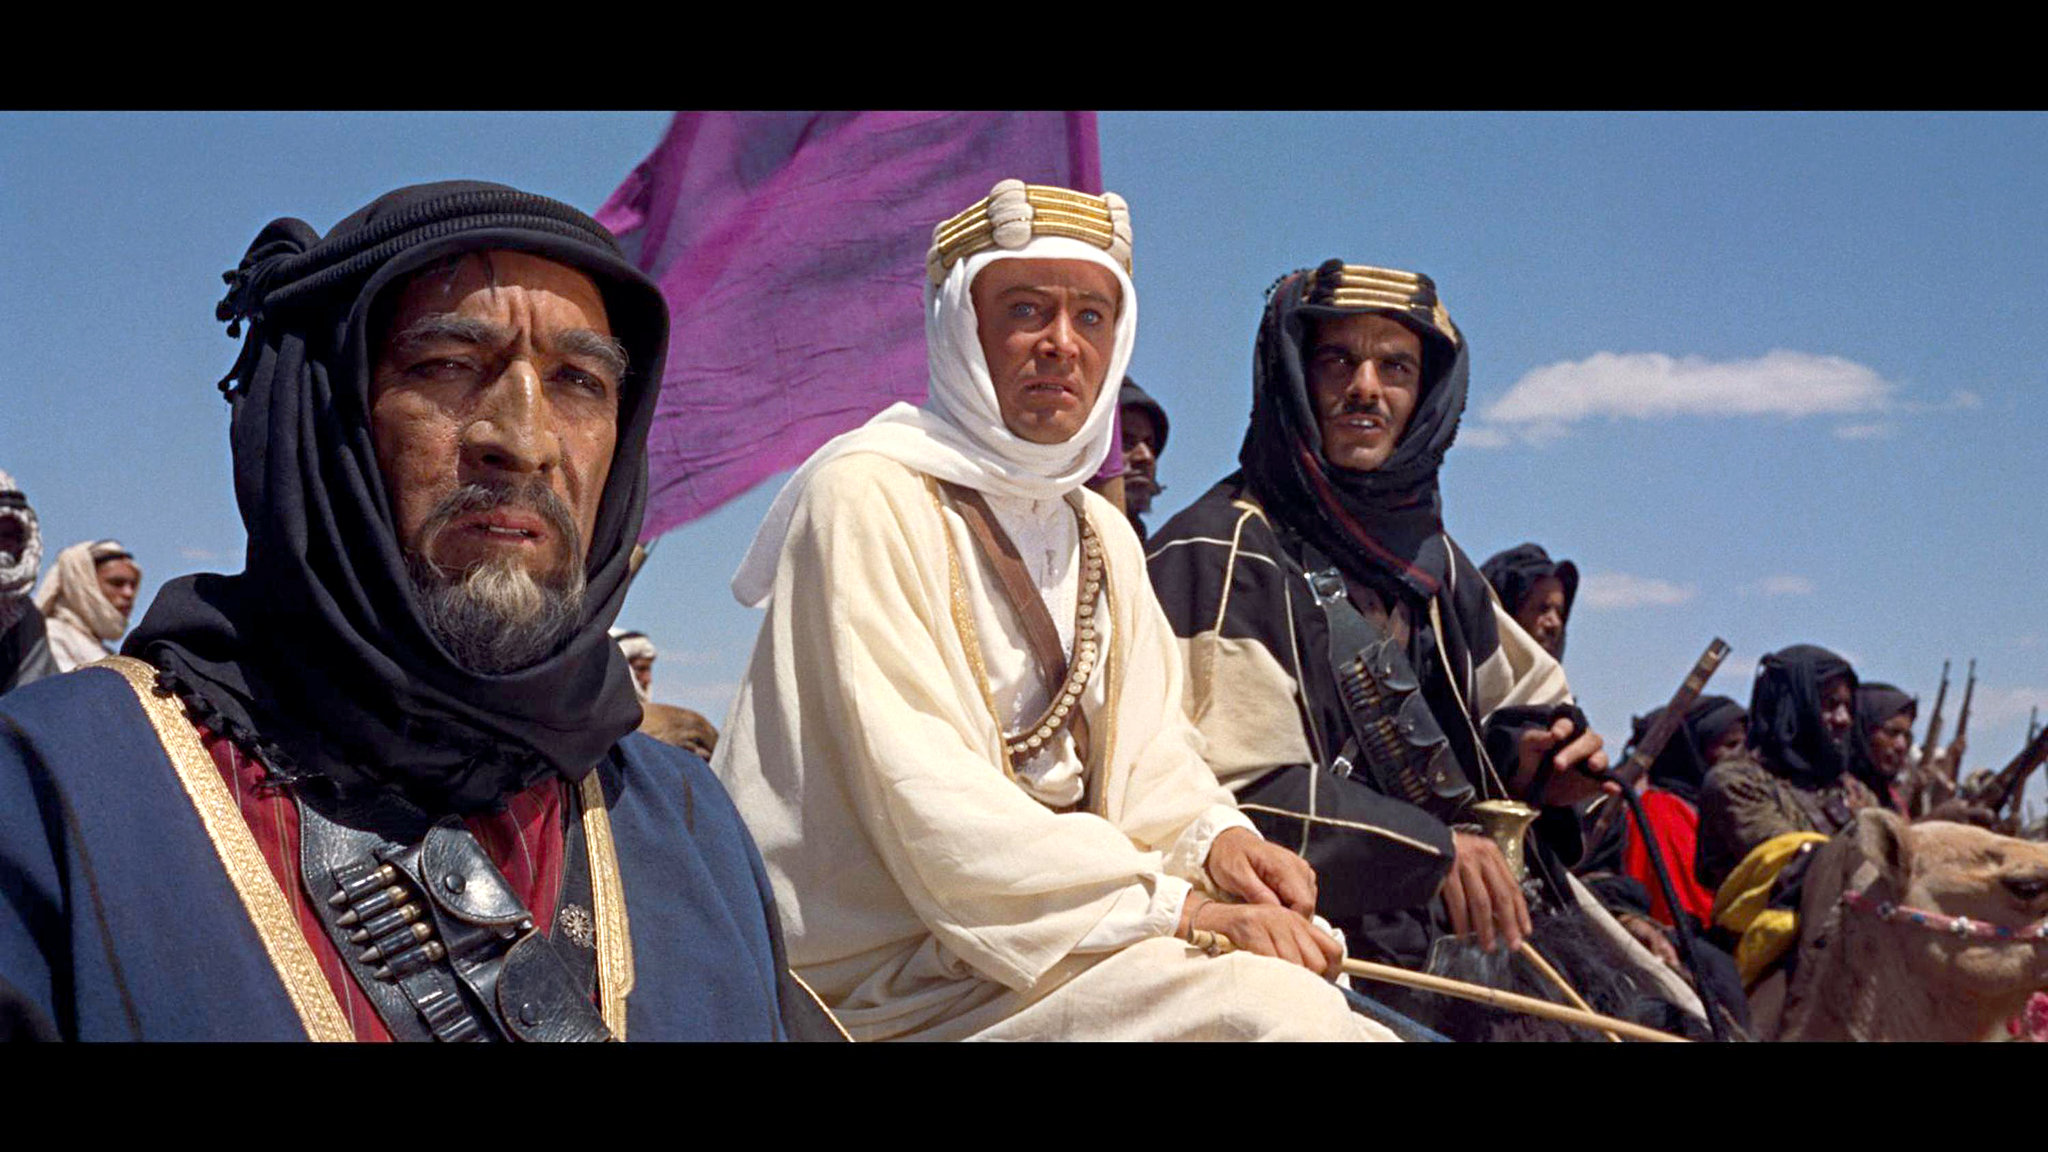 Lawrence of Arabia (1962) - With it’s runtime of 227 minutes, Lawrence of Arabia was one of the first and greatest epics in cinema. Directed by David Lean and starring Peter O’Toole in the title role, the film is based on the life of T.E. Lawrence and his involvement in the Arabian Peninsula during World War 1. The entire film is shot from left to right because the director want the audience to feel like they were going on a journey subconsciously.